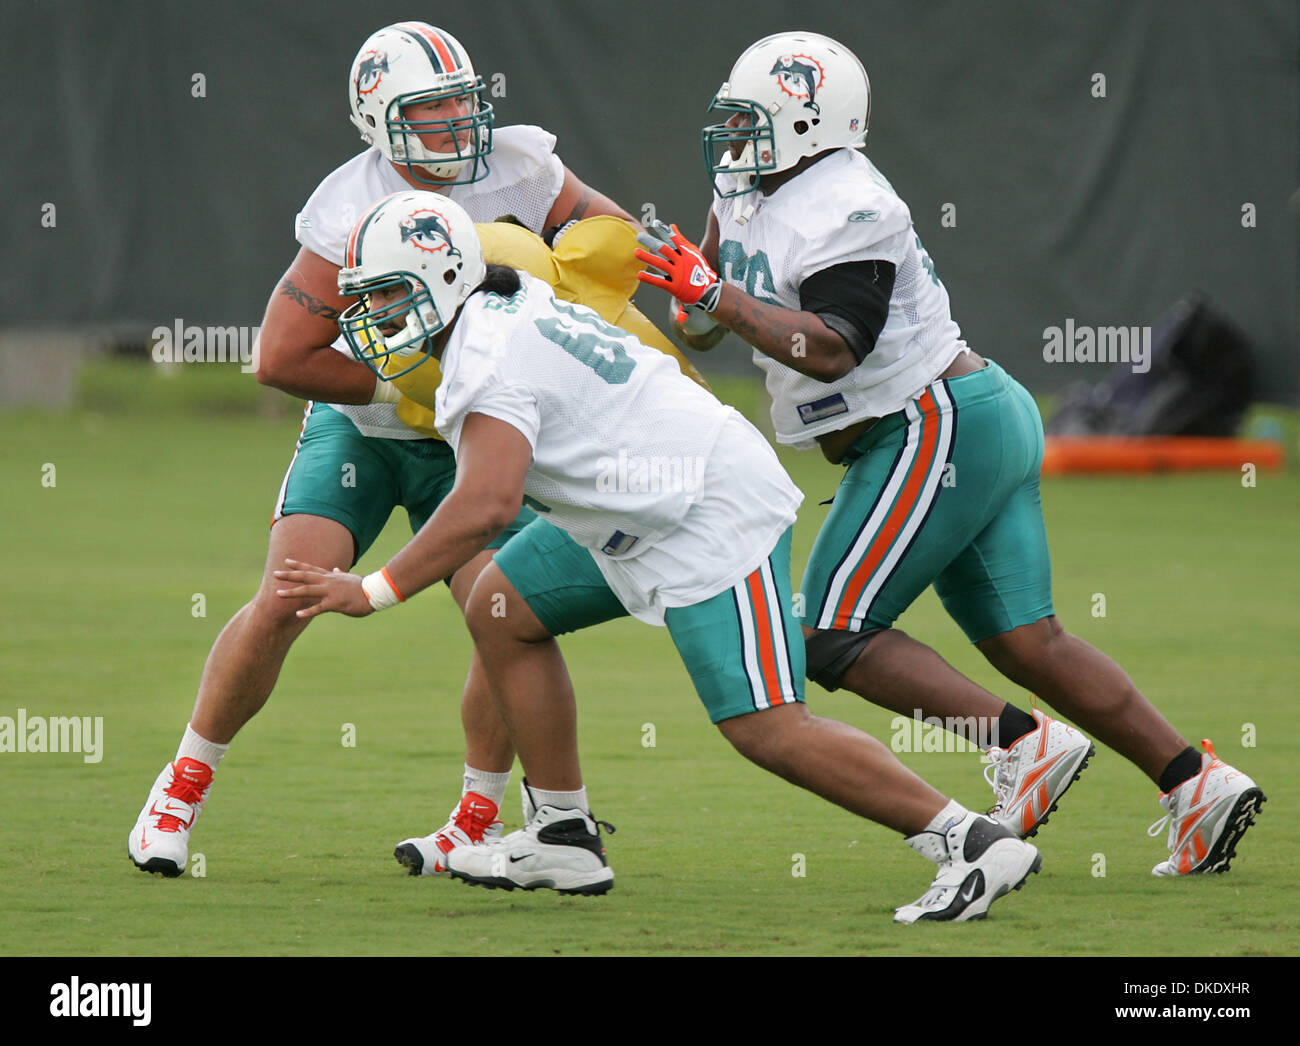 Jun 08, 2007 - Davie, FL, USA - Offensive linemen #64 SAMSON SATELE(foreground), #77 DREW MORMINO and #66 REX HADNOT practice a blocking drill at Dolphins mini camp. (Credit Image: © Allen Eyestone/Palm Beach Post/ZUMA Press) RESTRICTIONS: USA Tabloid RIGHTS OUT! Stock Photo